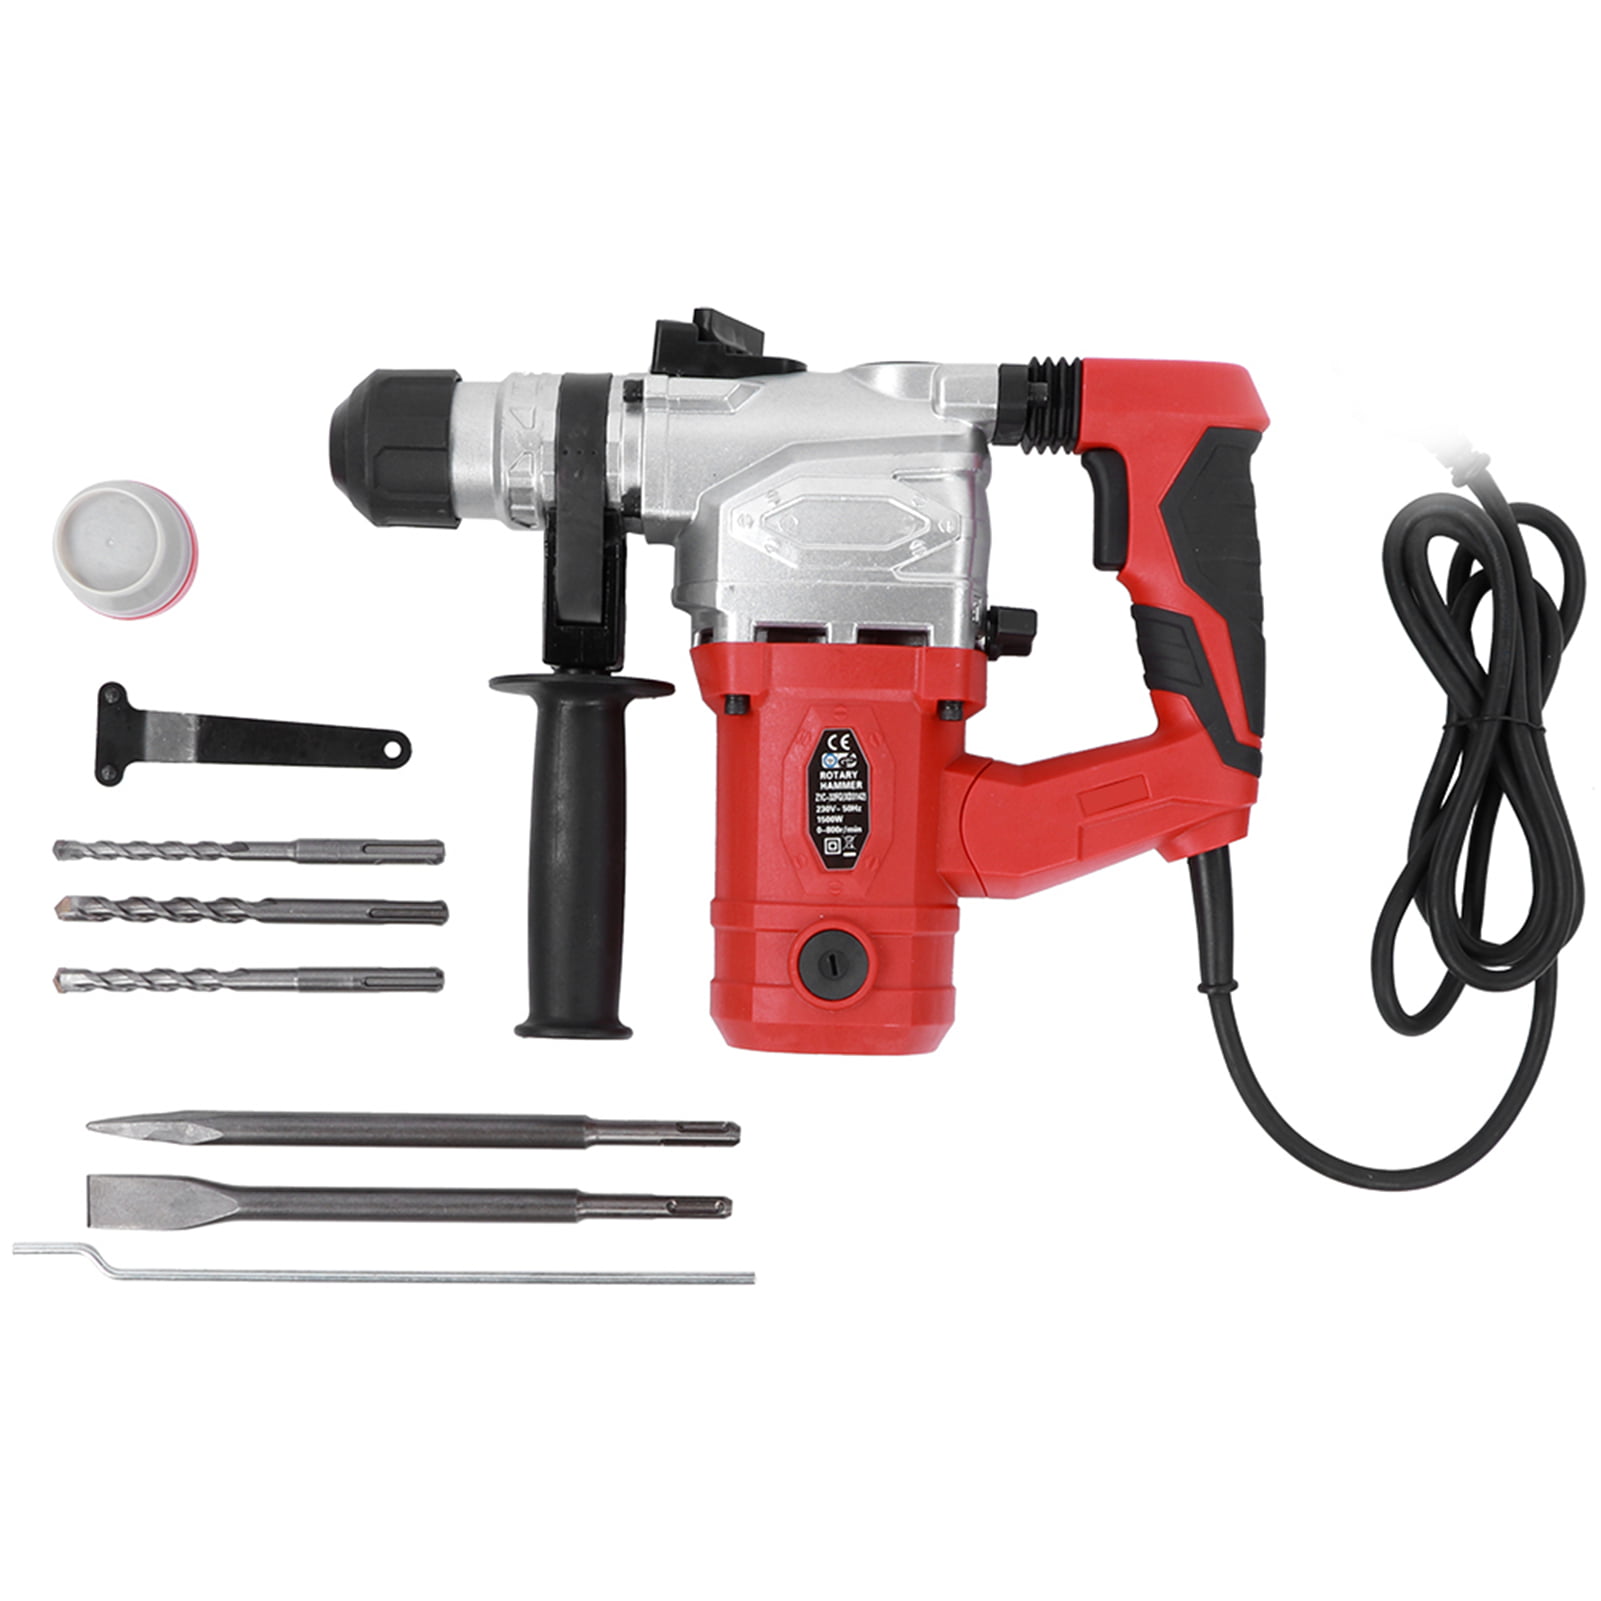 Electric Hammer Set Electrician Tools 1500W 360-Degree Adjustable SDS Plus Bits 